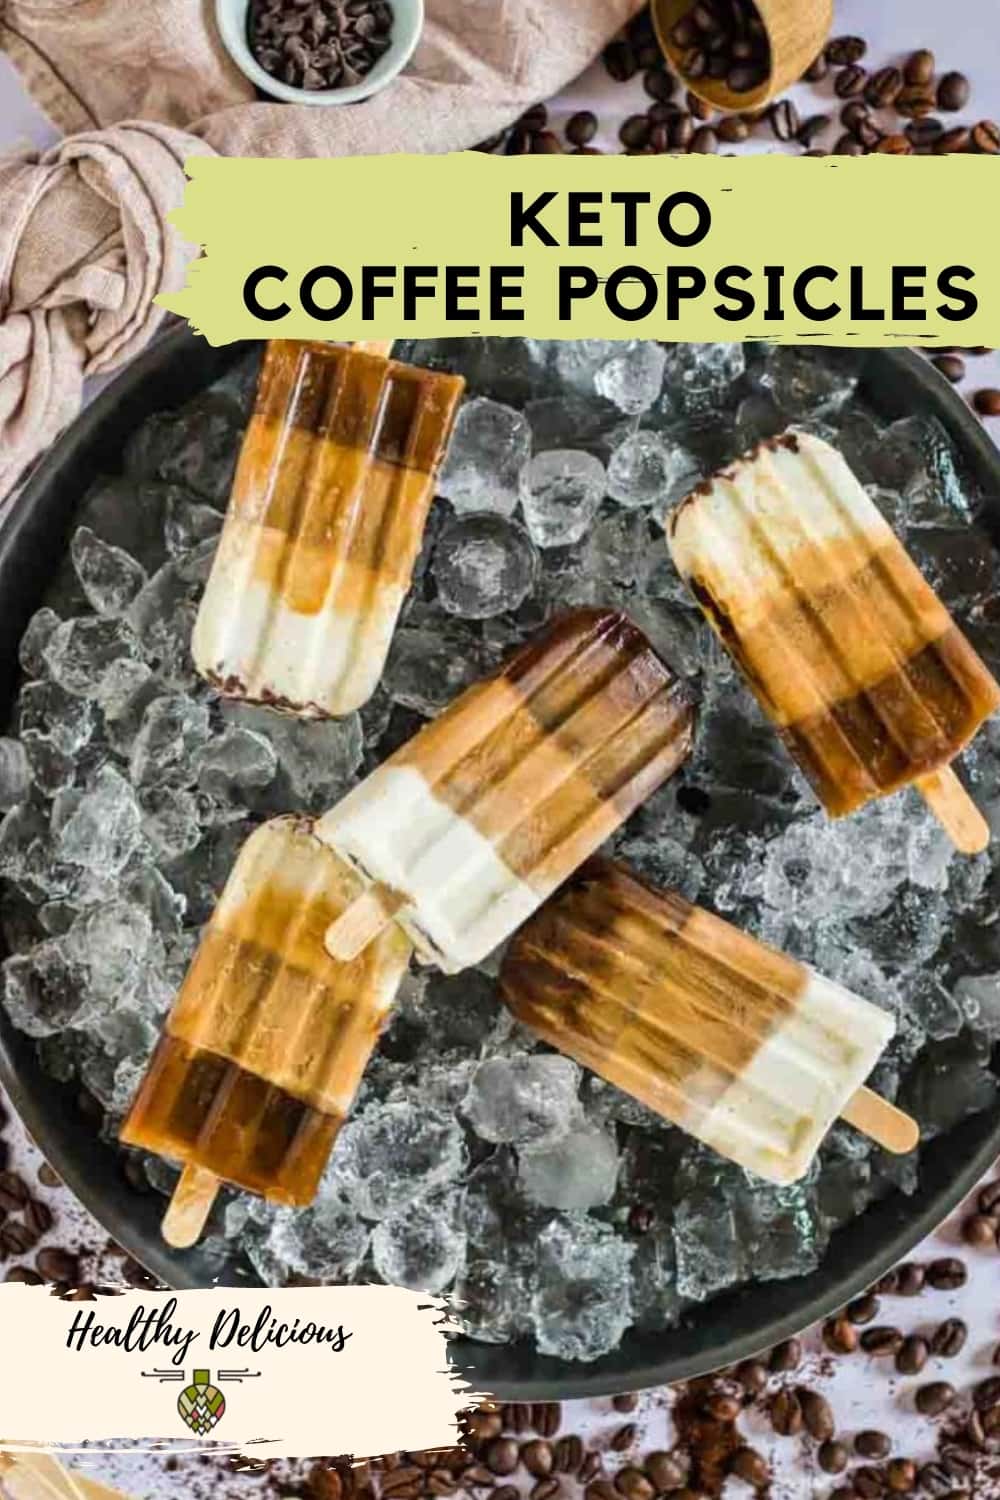 Triple-layer keto coffee popsicles are a cool and creamy summer treat that are perfect for a hot day! You'll love this quick, sugar-free pick-me-up. via @HealthyDelish